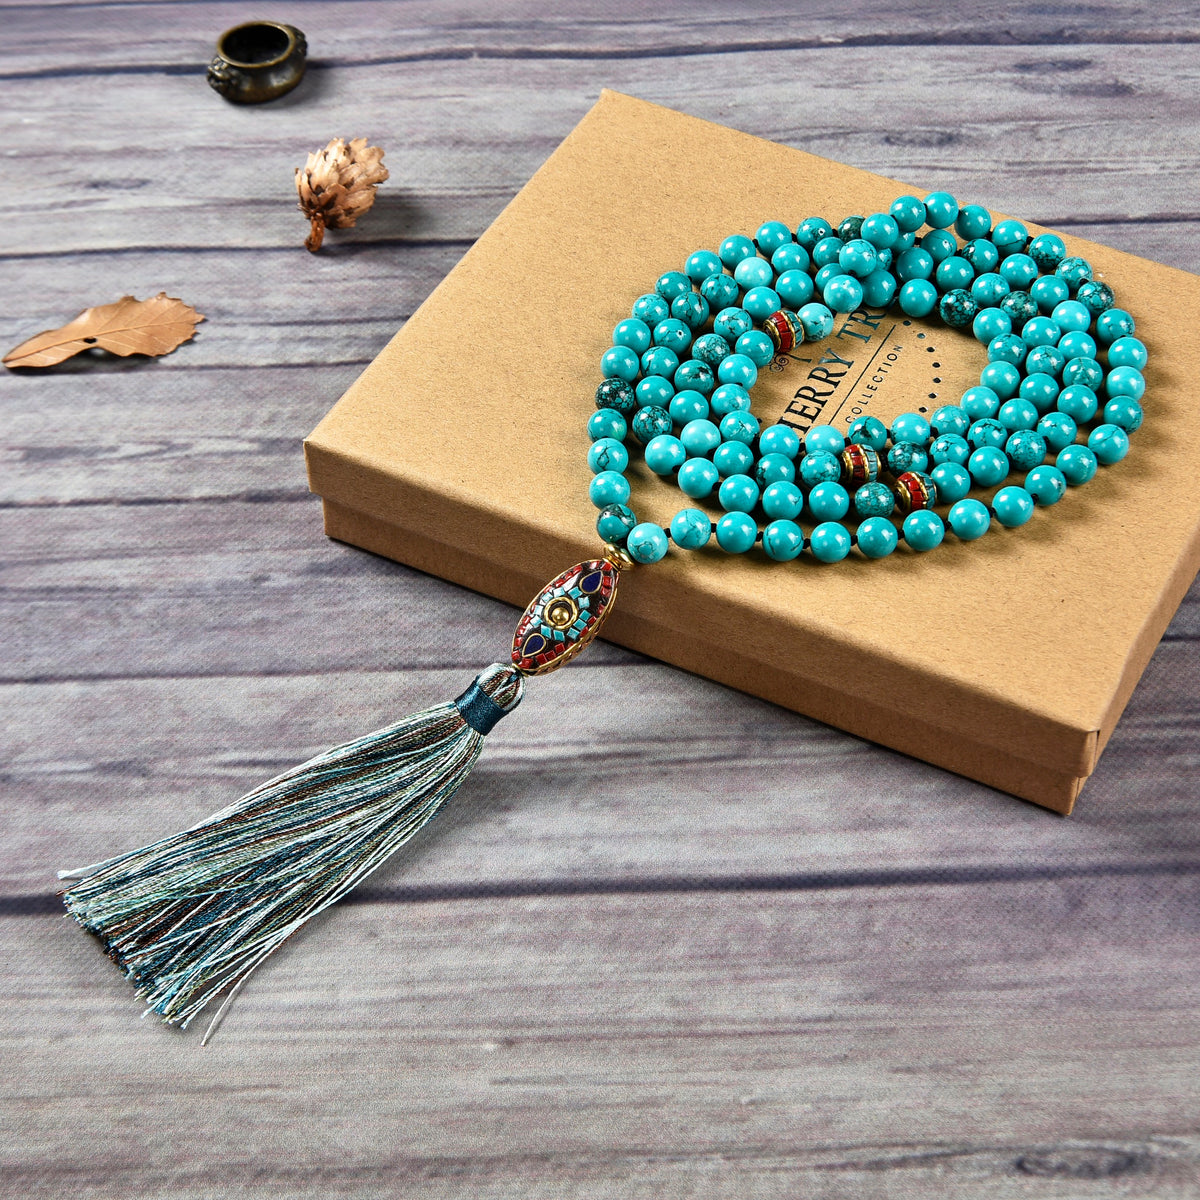 Mala Necklace | 108 Hand-Knotted 8mm Round Beads (Tibetan Turquoise Howlite)